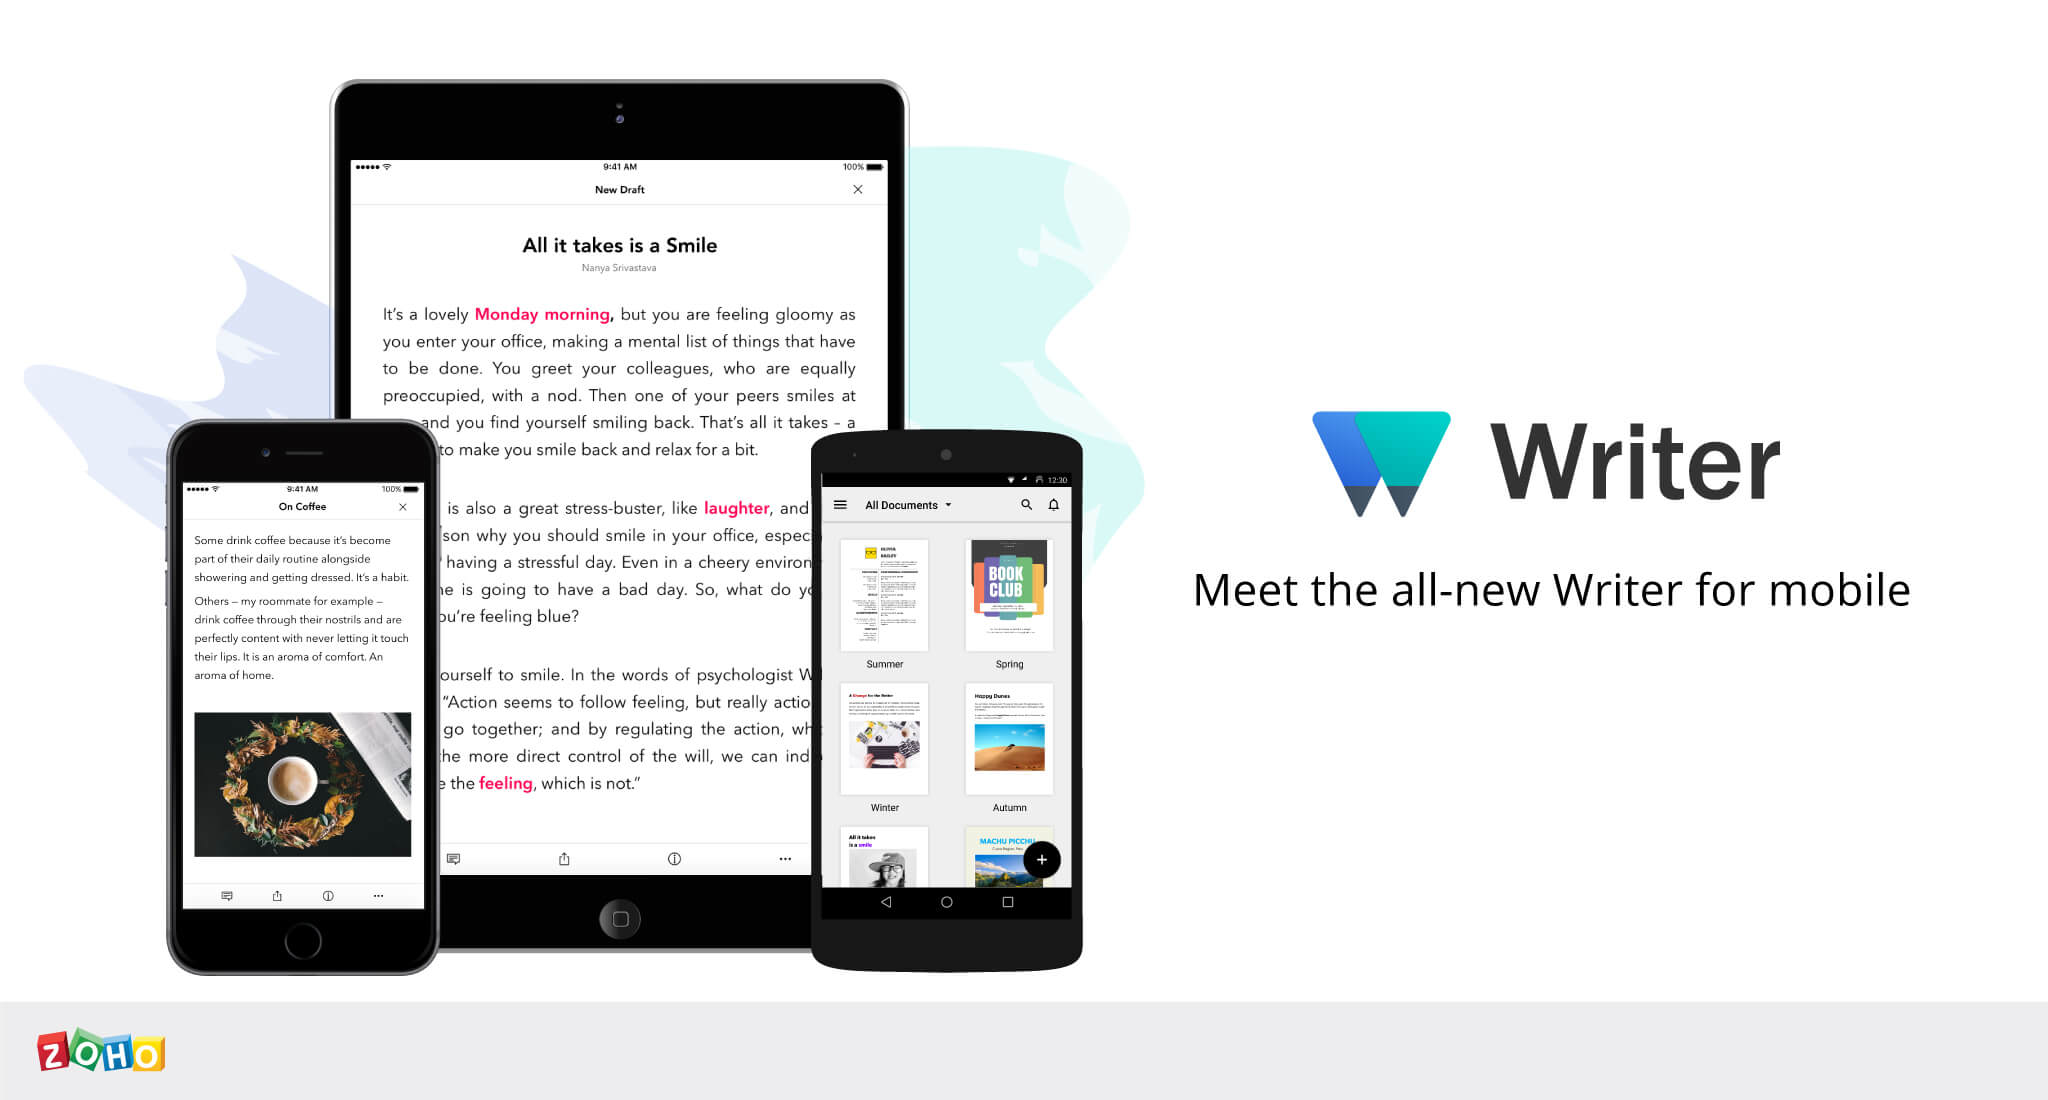 Introducing the All-new Writer for Mobile: A Big Leap Forward